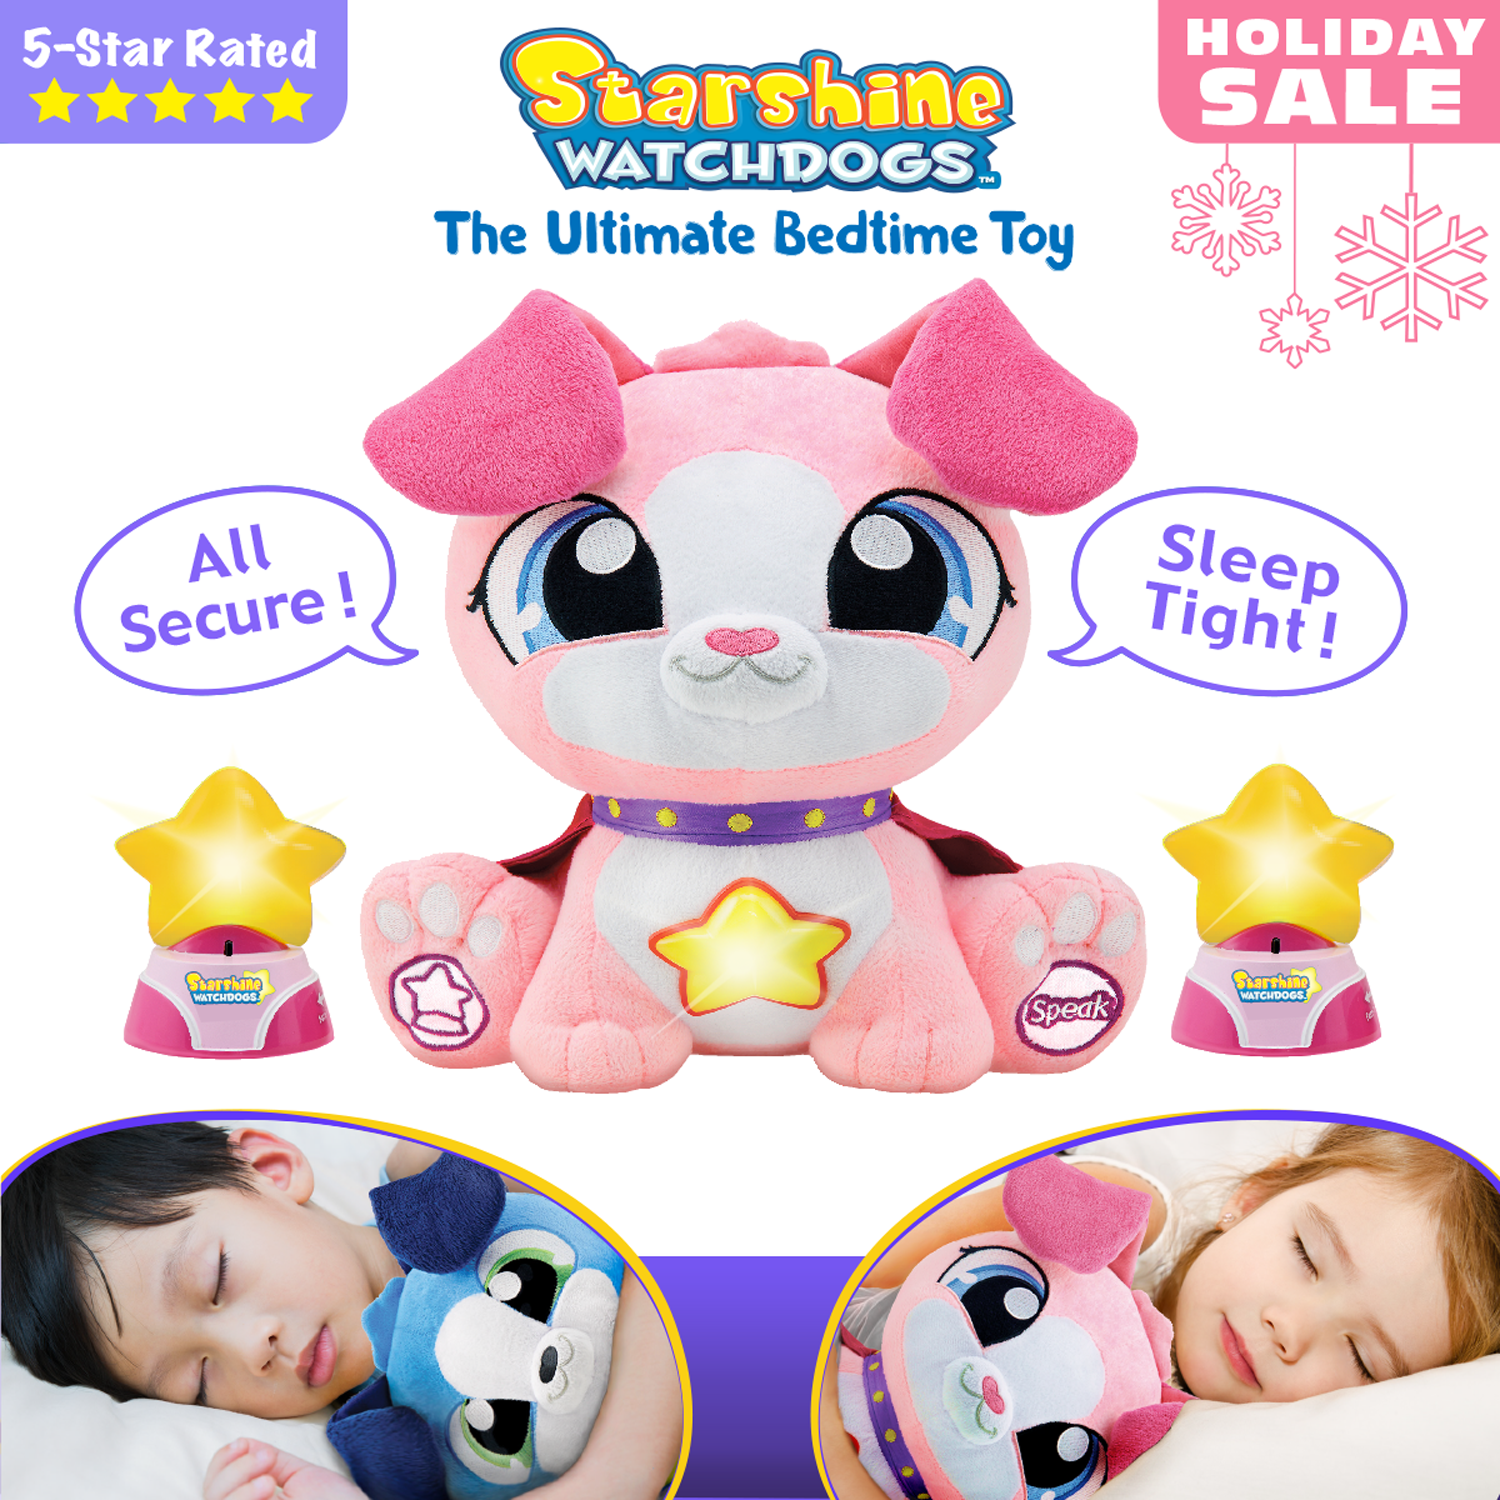 4pc Ready-for-Bed Set Comforting Phrases Pink Remote Control Children's Night-Lights Starshine Watchdogs Skye Talking Stuffed Animal Nighttime Toy Calming Story Book Remote Control Childrens Night-Lights Plus Free Coloring Pages